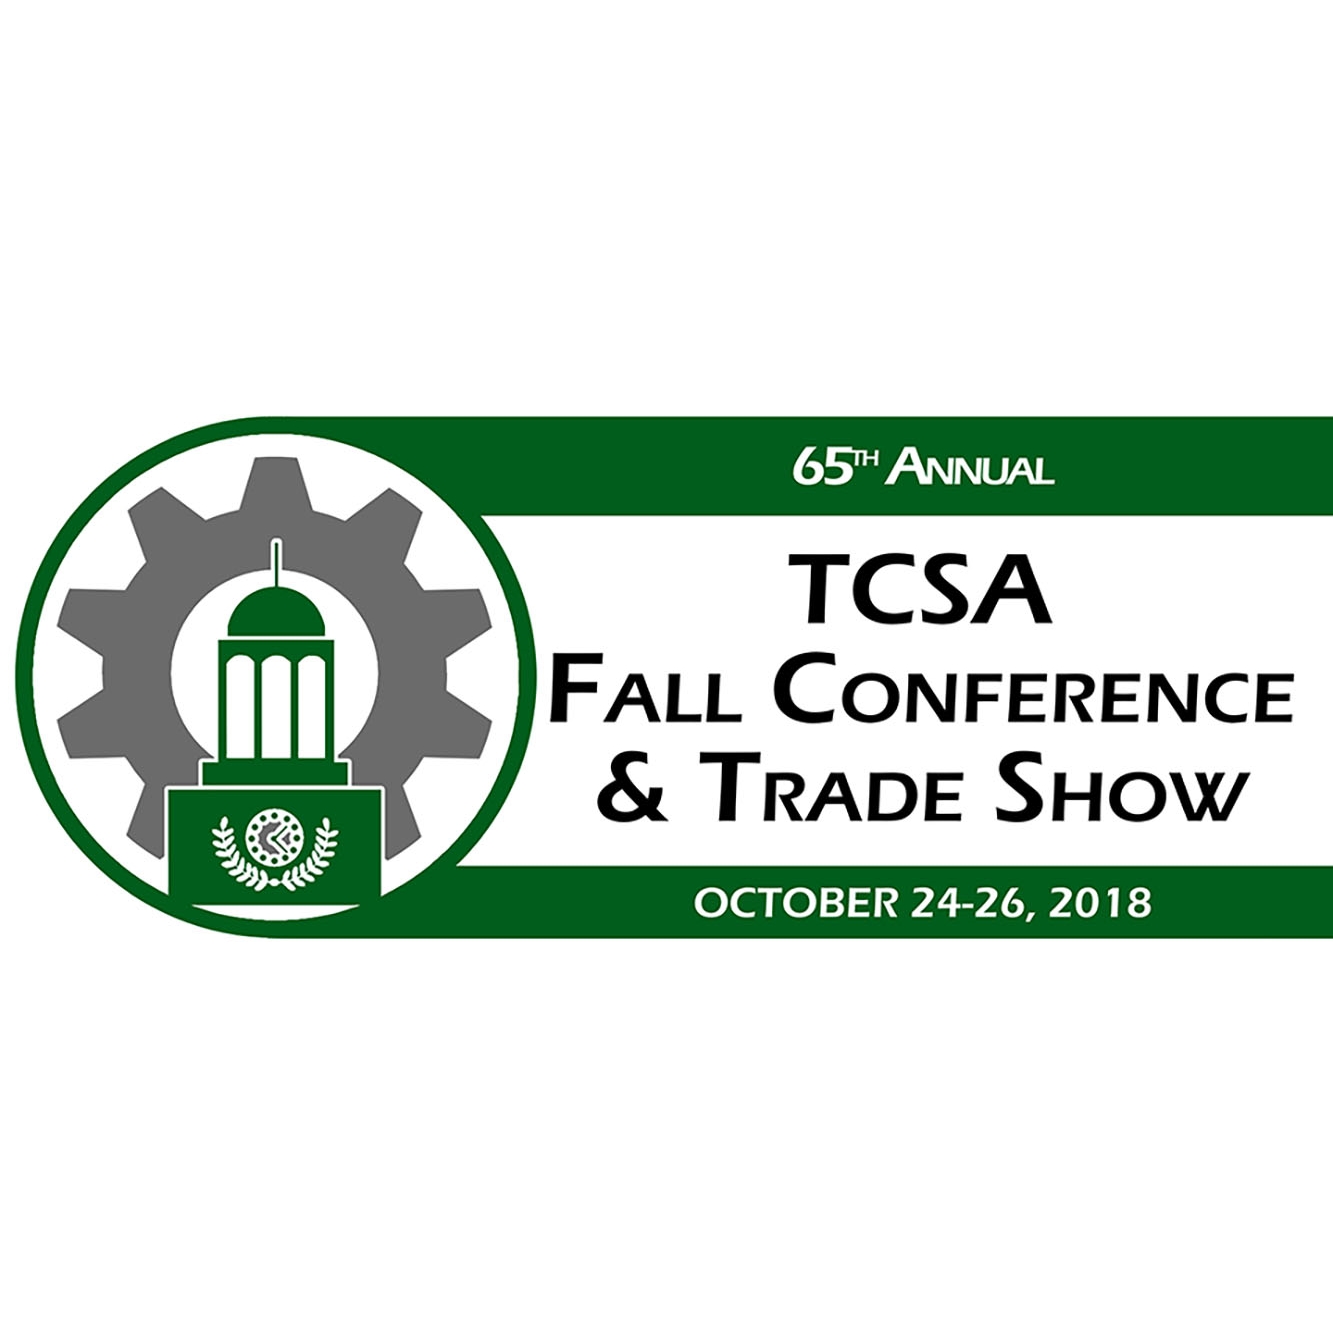 TCSA 2018 Fall Conference & Trade Show